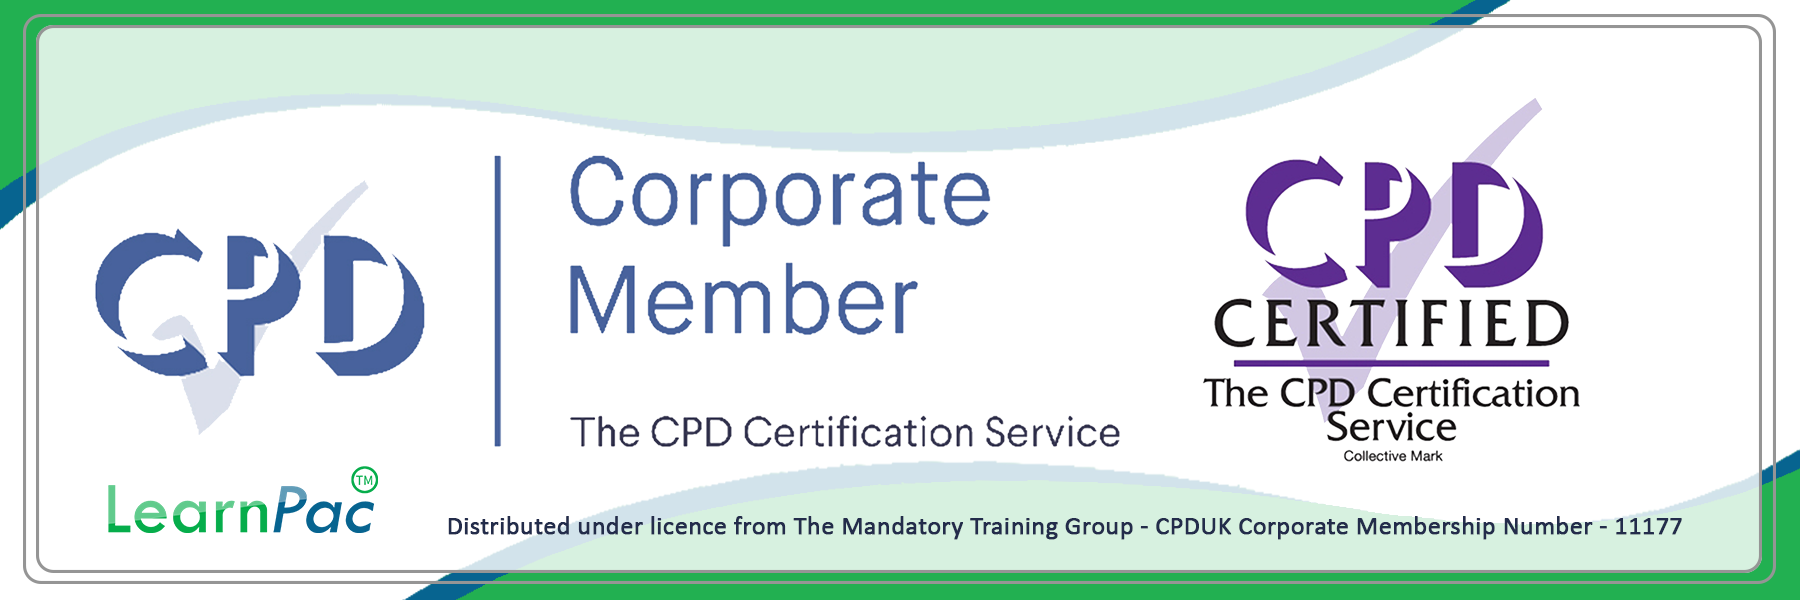 Clinical Observations Training - E-Learning Courses with Certificates - CPD Certified - LearnPac Systems UK -